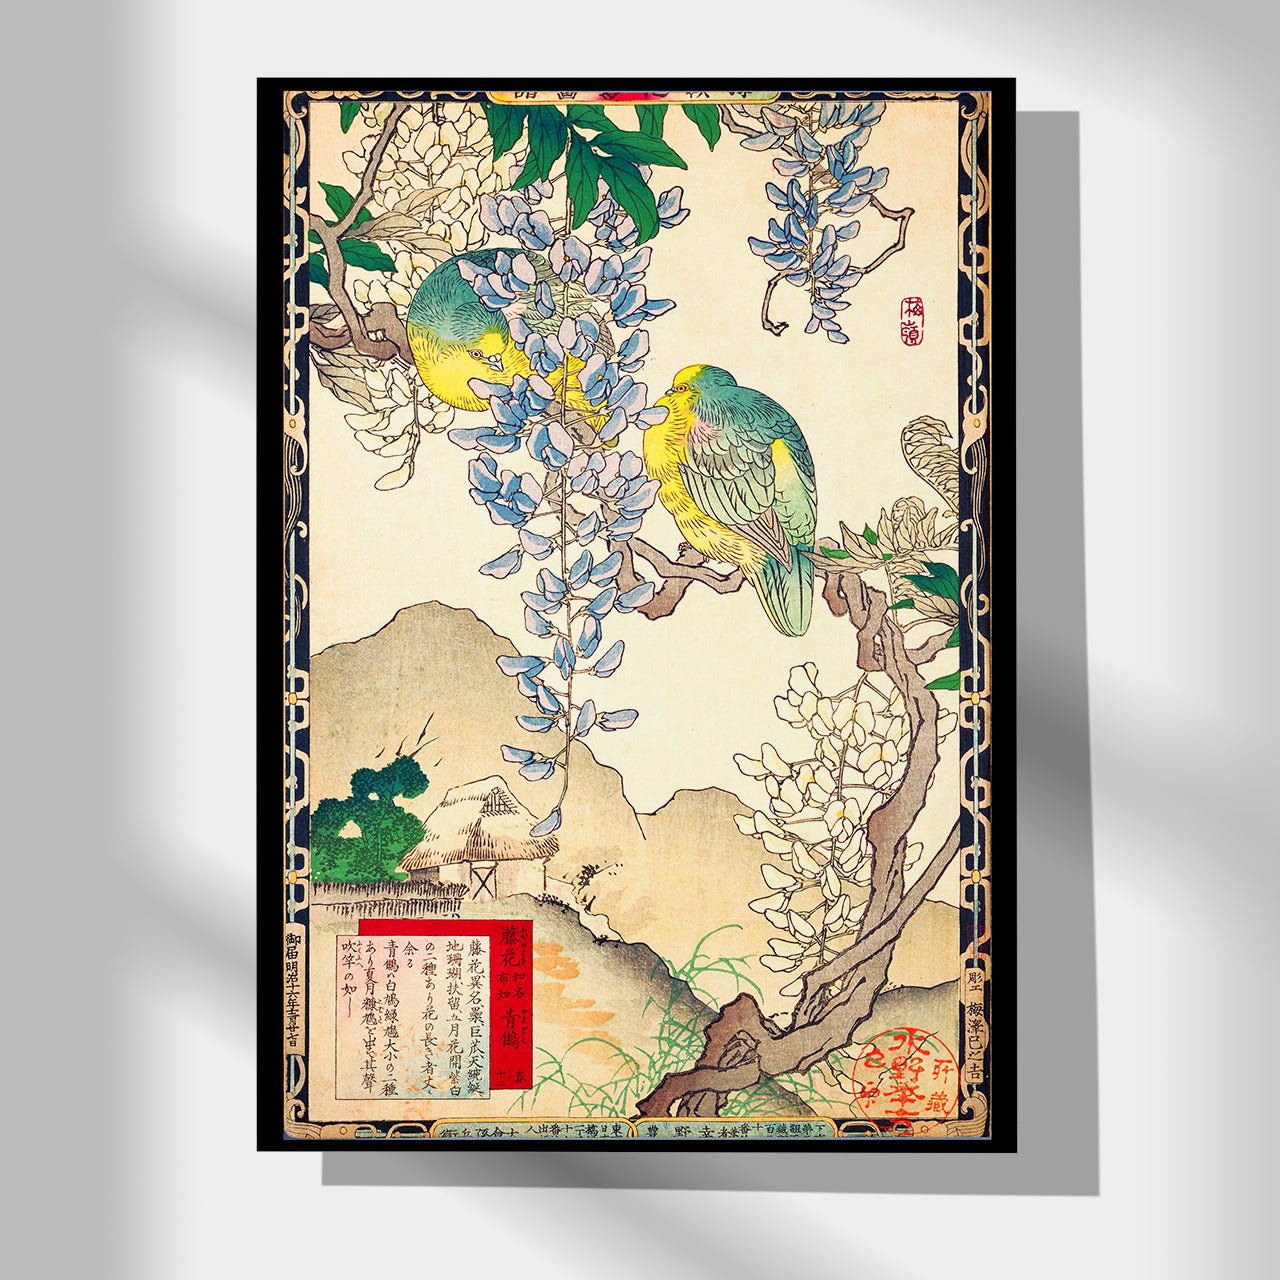 Wisteria flower and pigeon - Japonica Graphic